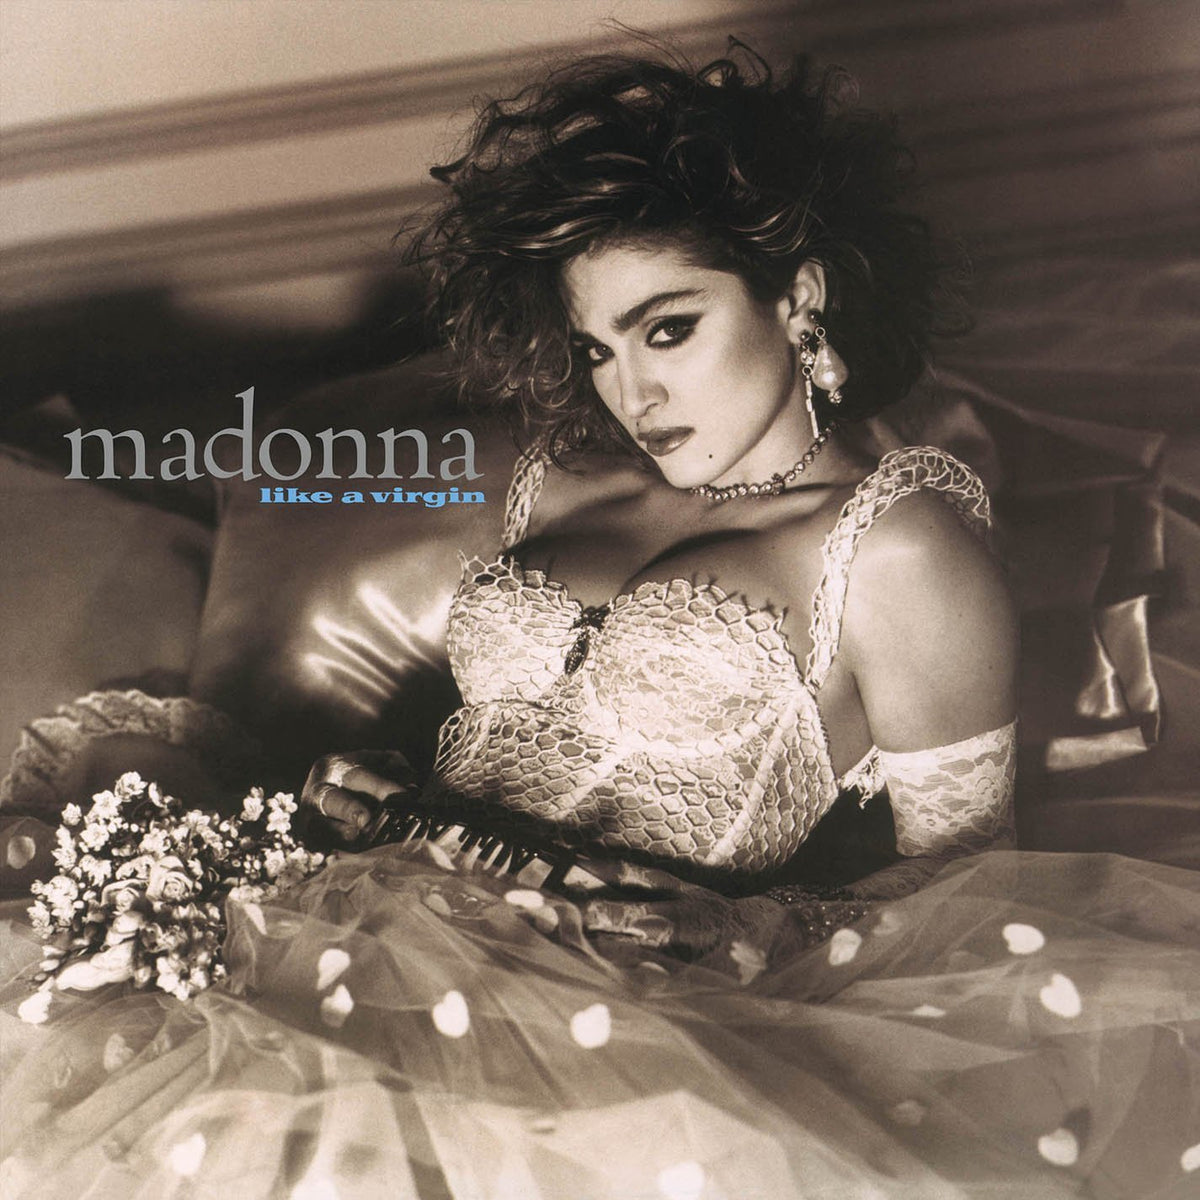 The 10 Best Madonna Albums To Own On Vinyl